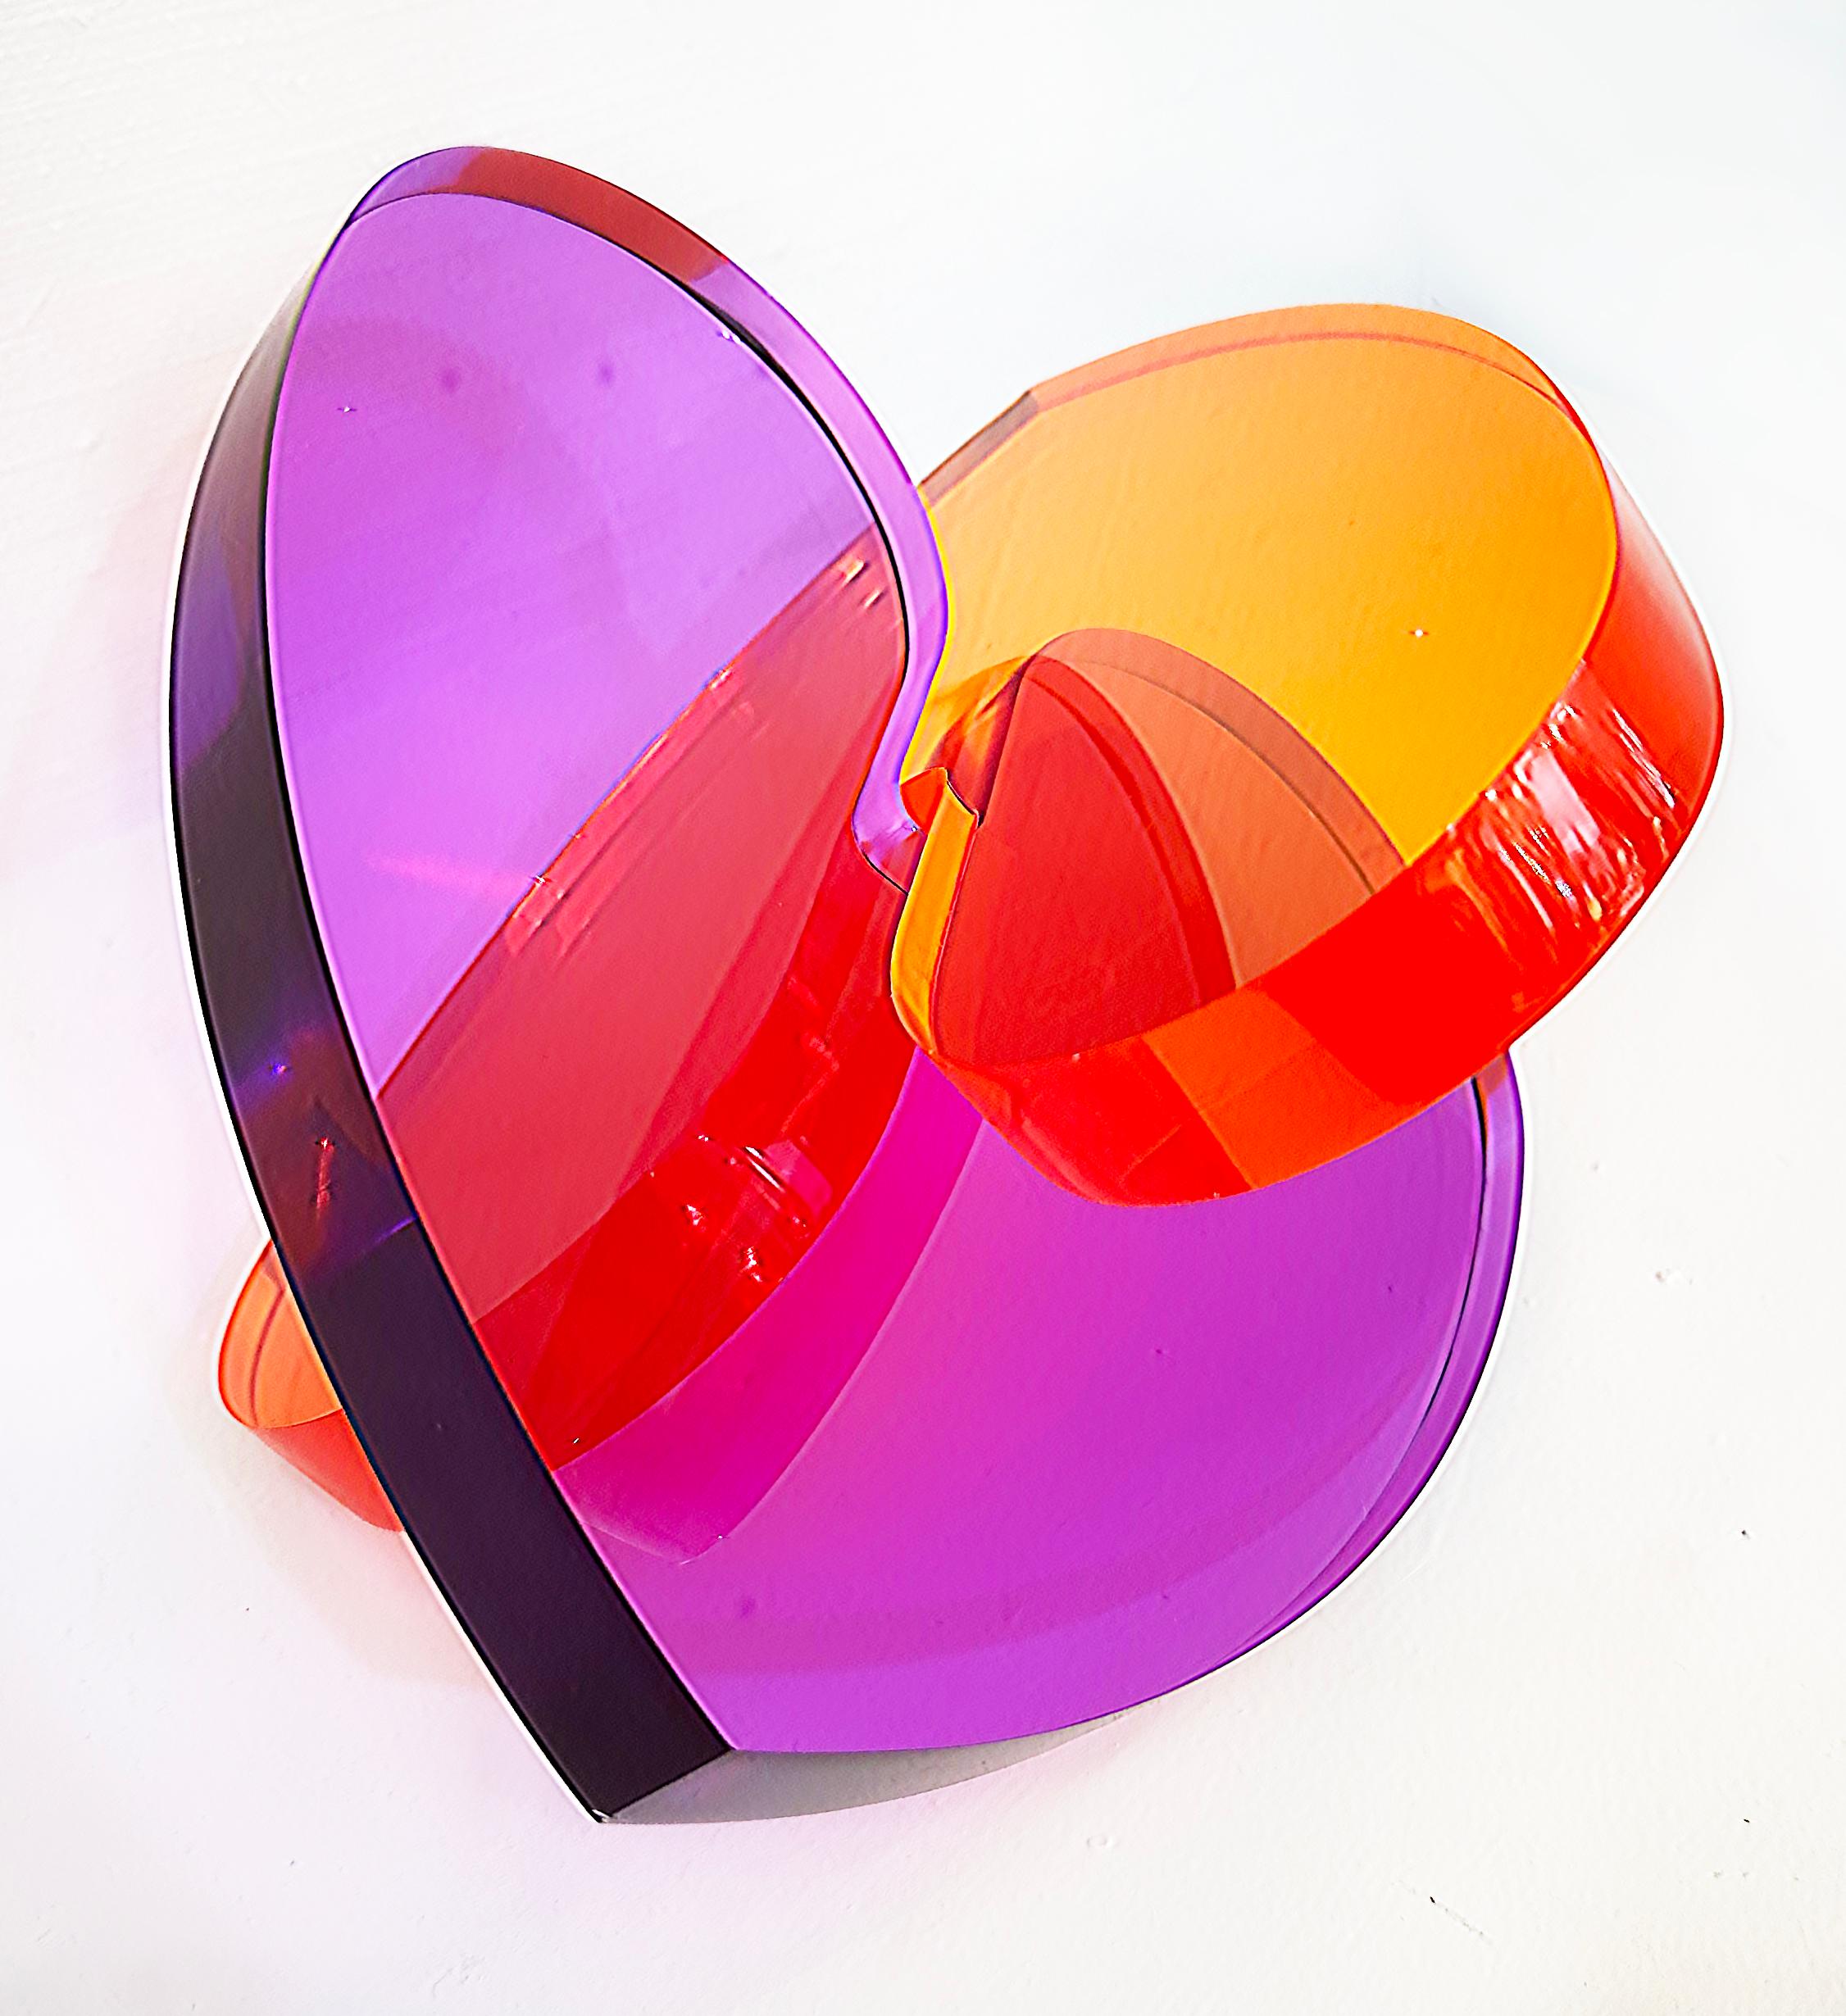 American Lucite Interlocking Hearts  Sculpture by Michael Gitter Available in Many Colors